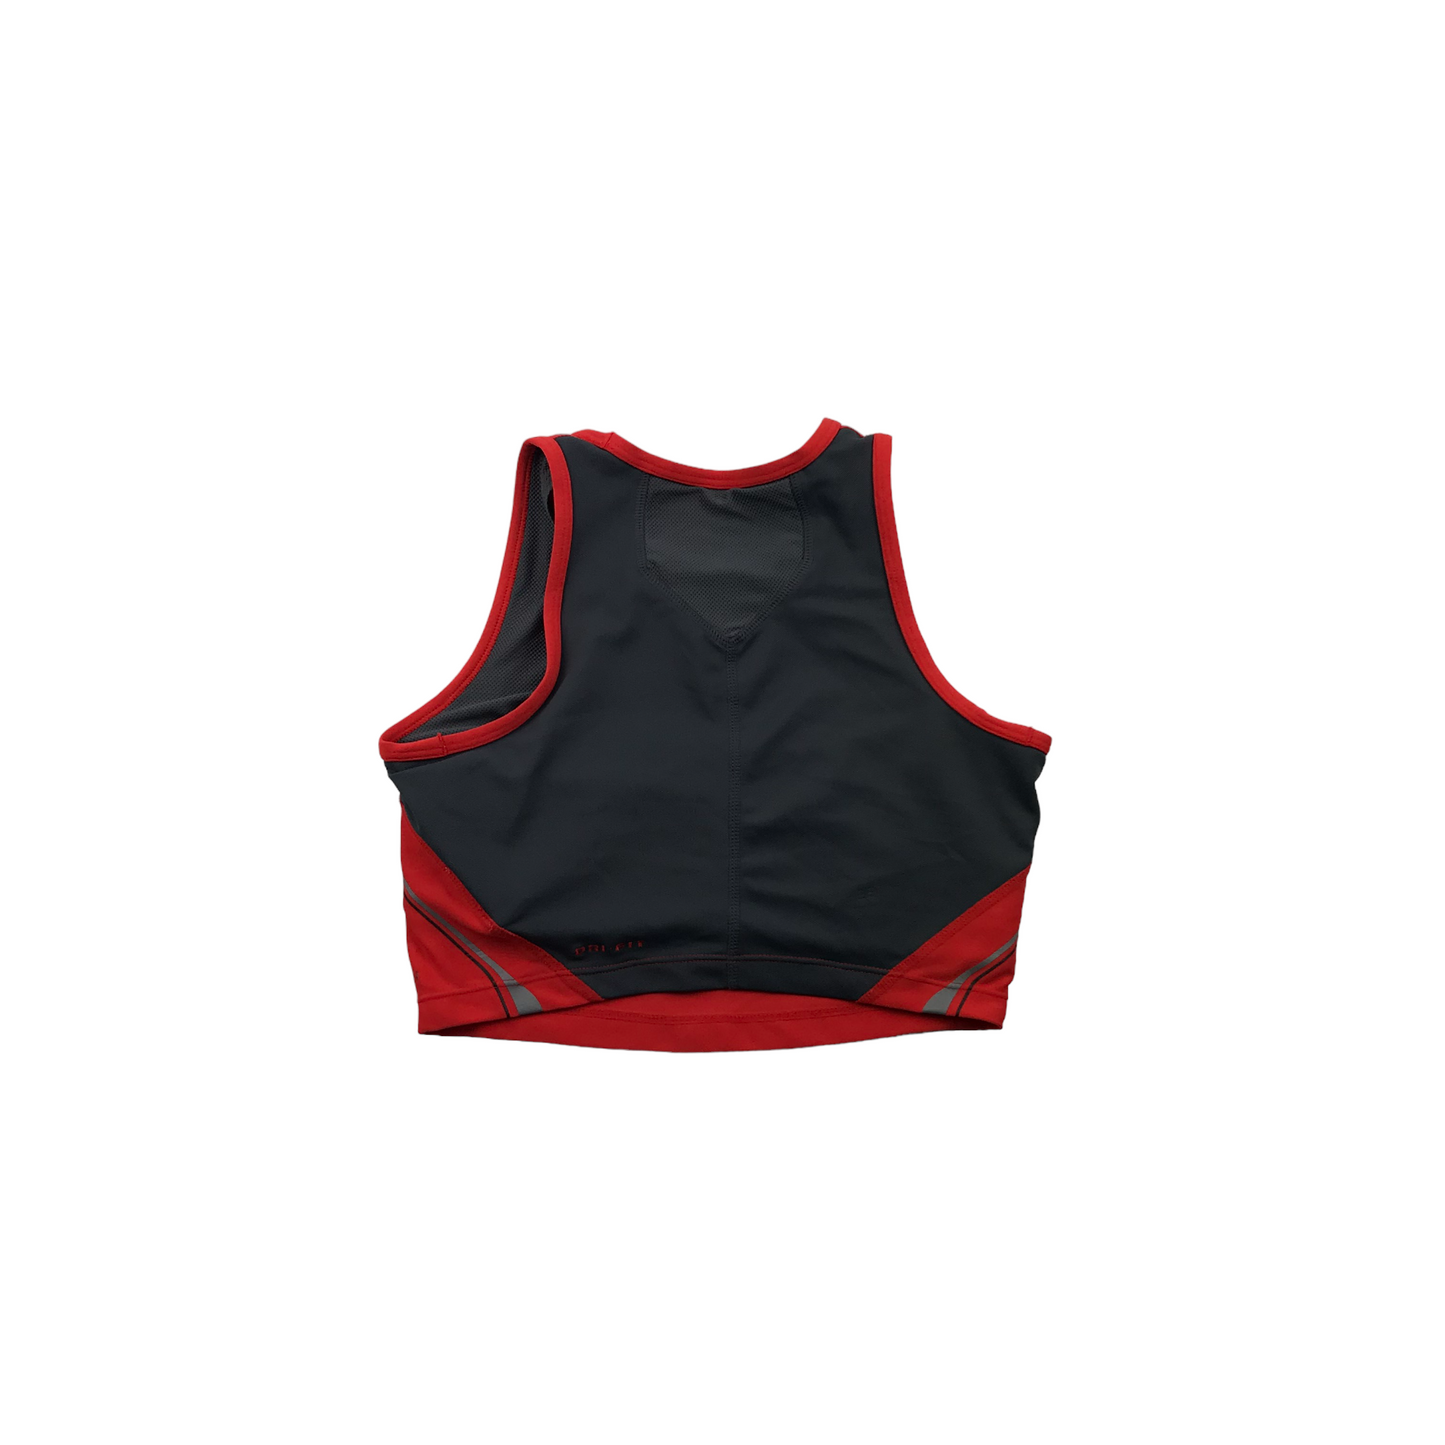 Nike Red Sports Crop Top Women's Size S